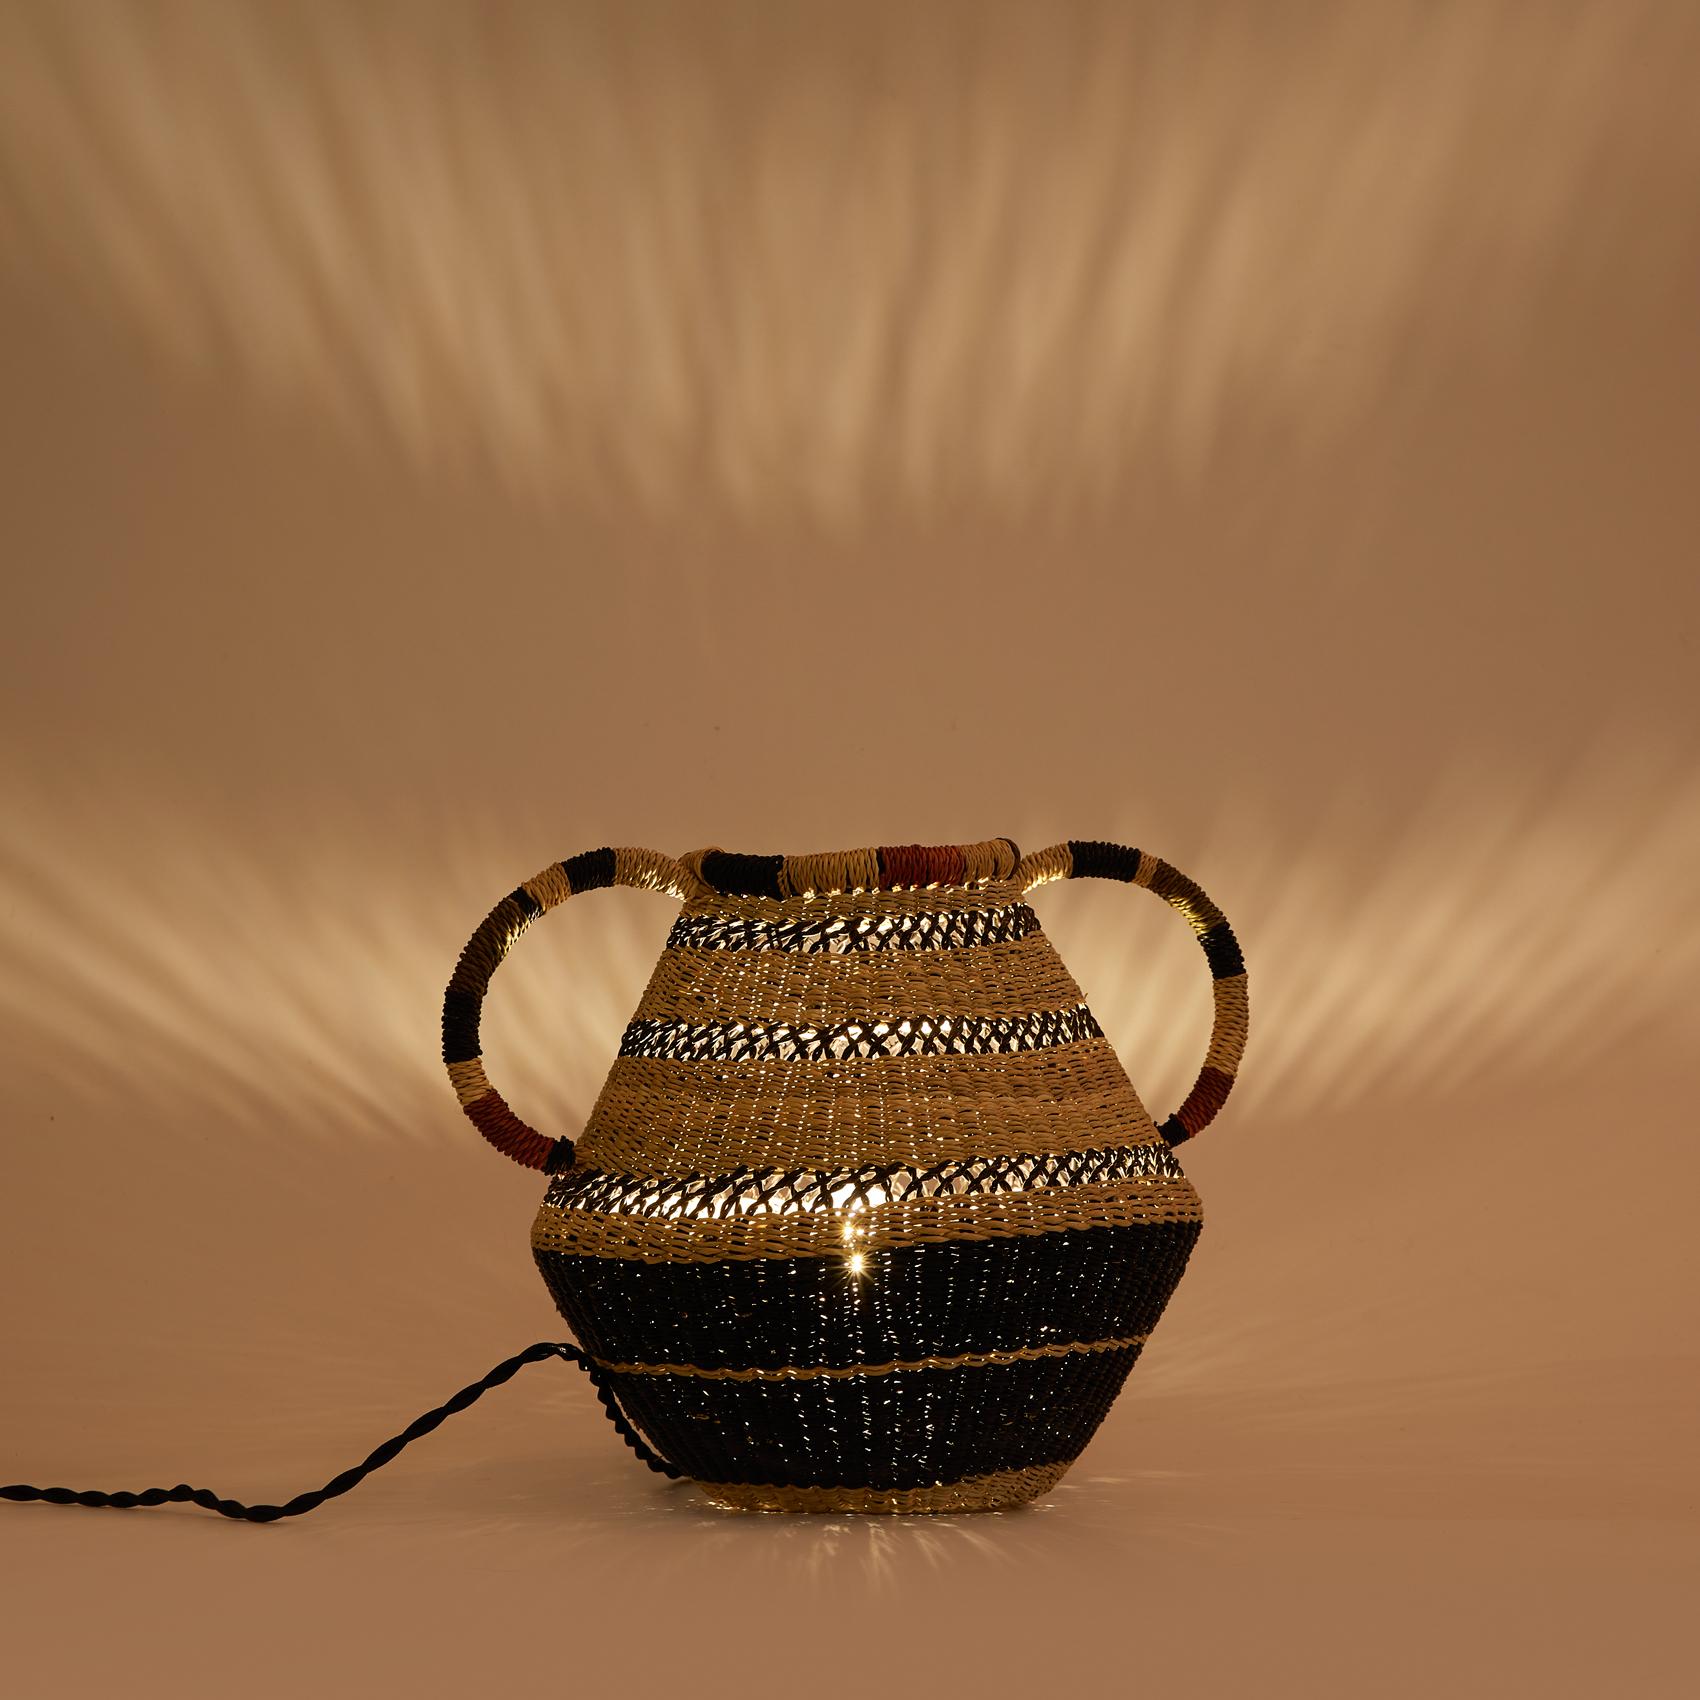 Modern Contemporary Ethnic Small Pot Lamp Handwoven Straw Striped Handle